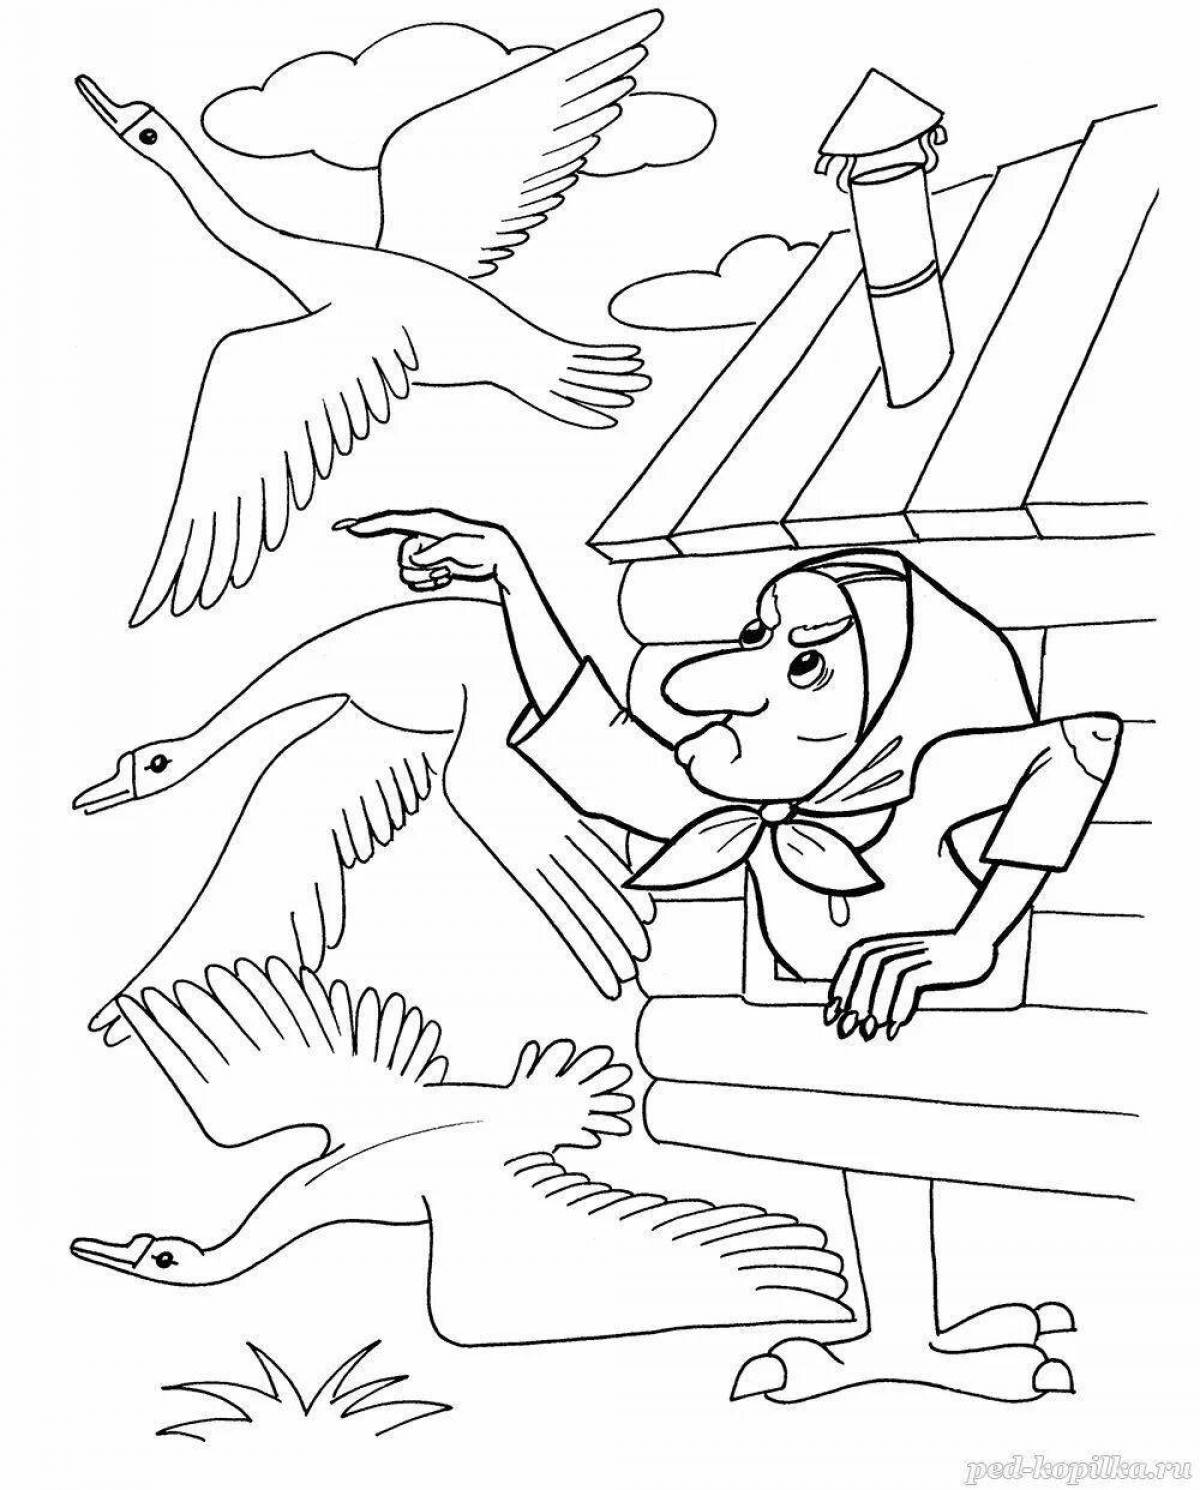 Coloring fairy tale geese swans